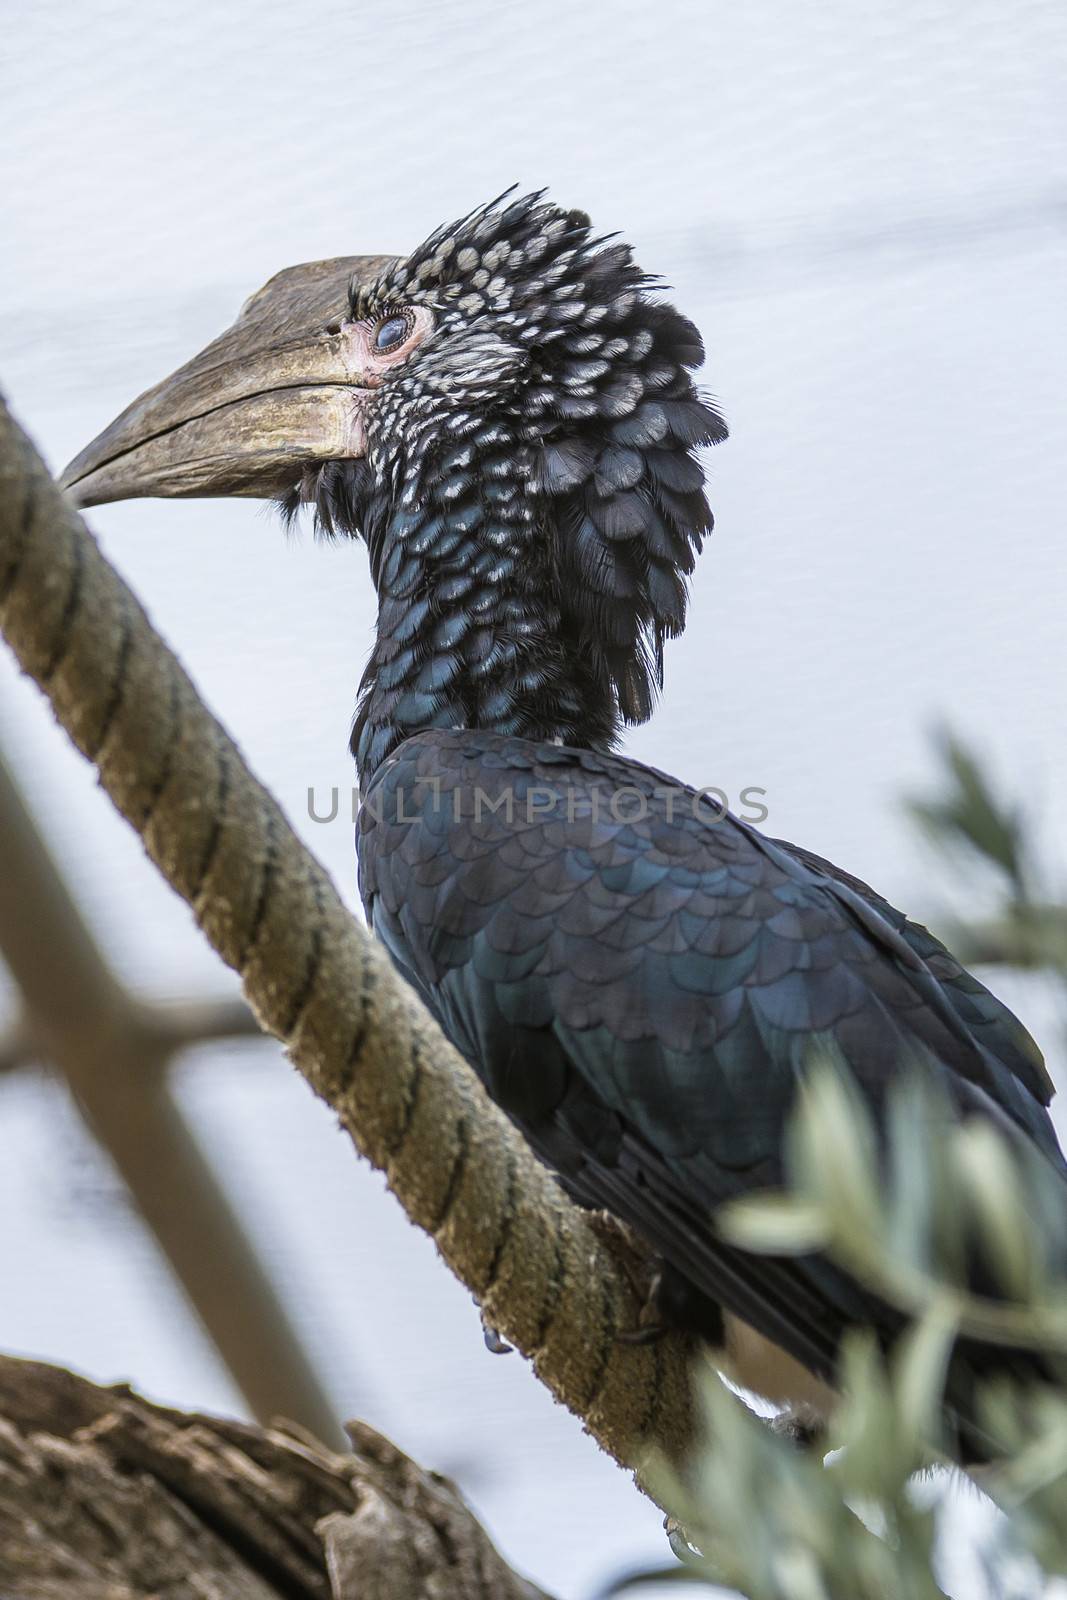 The Silvery-cheeked Hornbill (Bycanistes brevis) is a large bird with a very large creamy casque on the beak. Silvery-cheeked Hornbills are residents of the tall evergreen forests of East Africa from Ethiopia to South Africa.